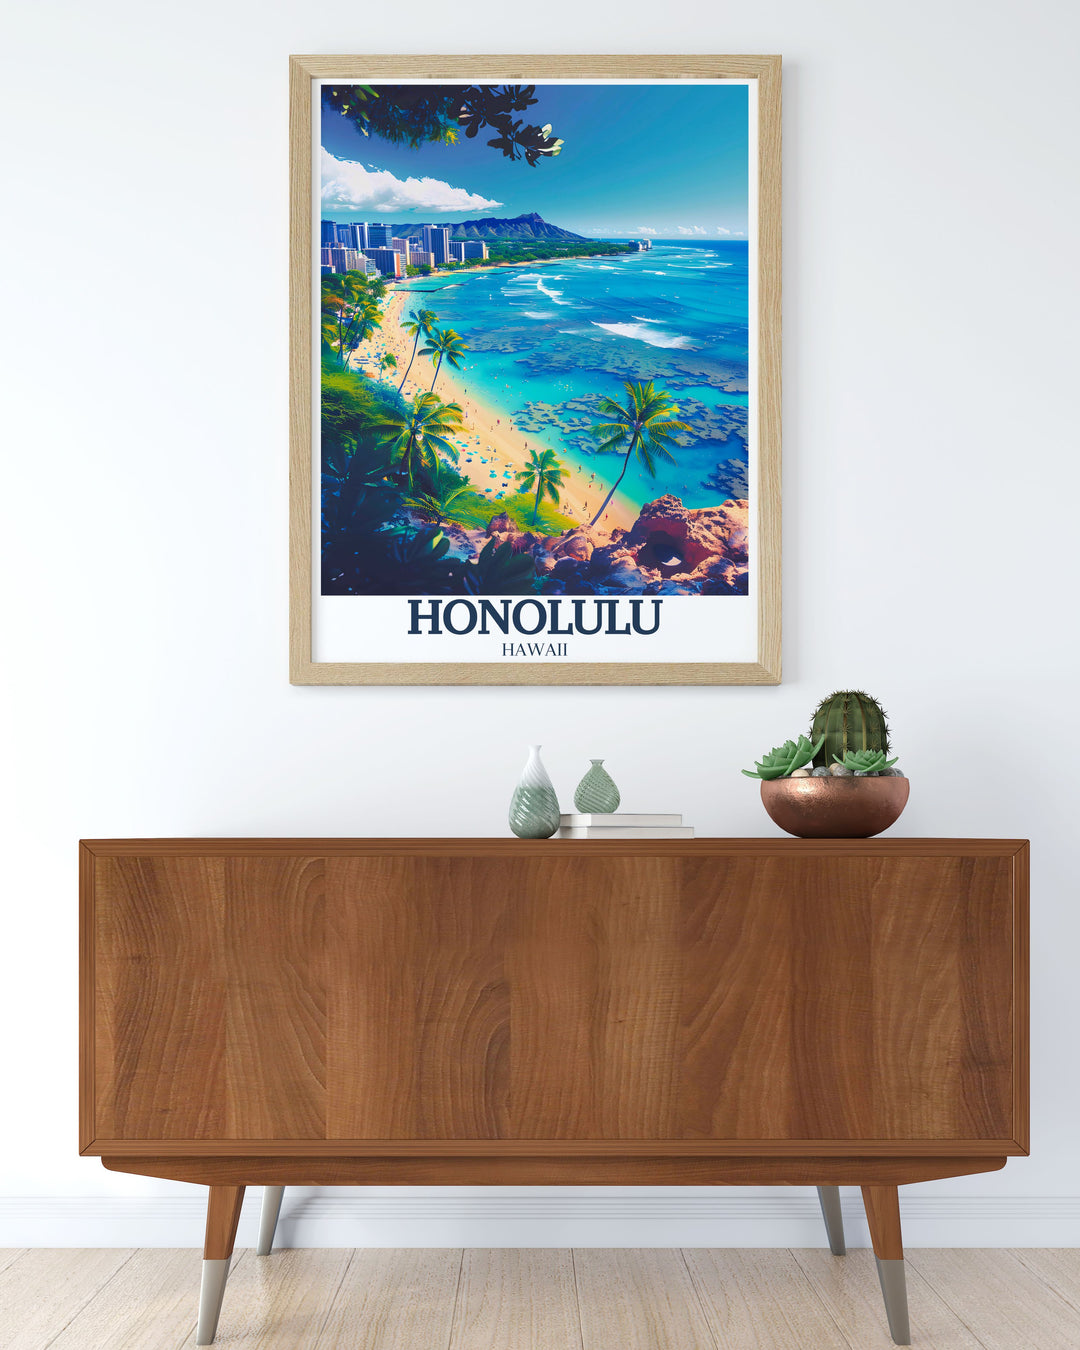 Fine art print of Waikiki Beach in Honolulu, Hawaii, capturing the iconic views and lively atmosphere of this famous shoreline. The artwork showcases the beachs vibrant life and tropical charm, offering a beautiful depiction of Hawaiis coastal beauty.